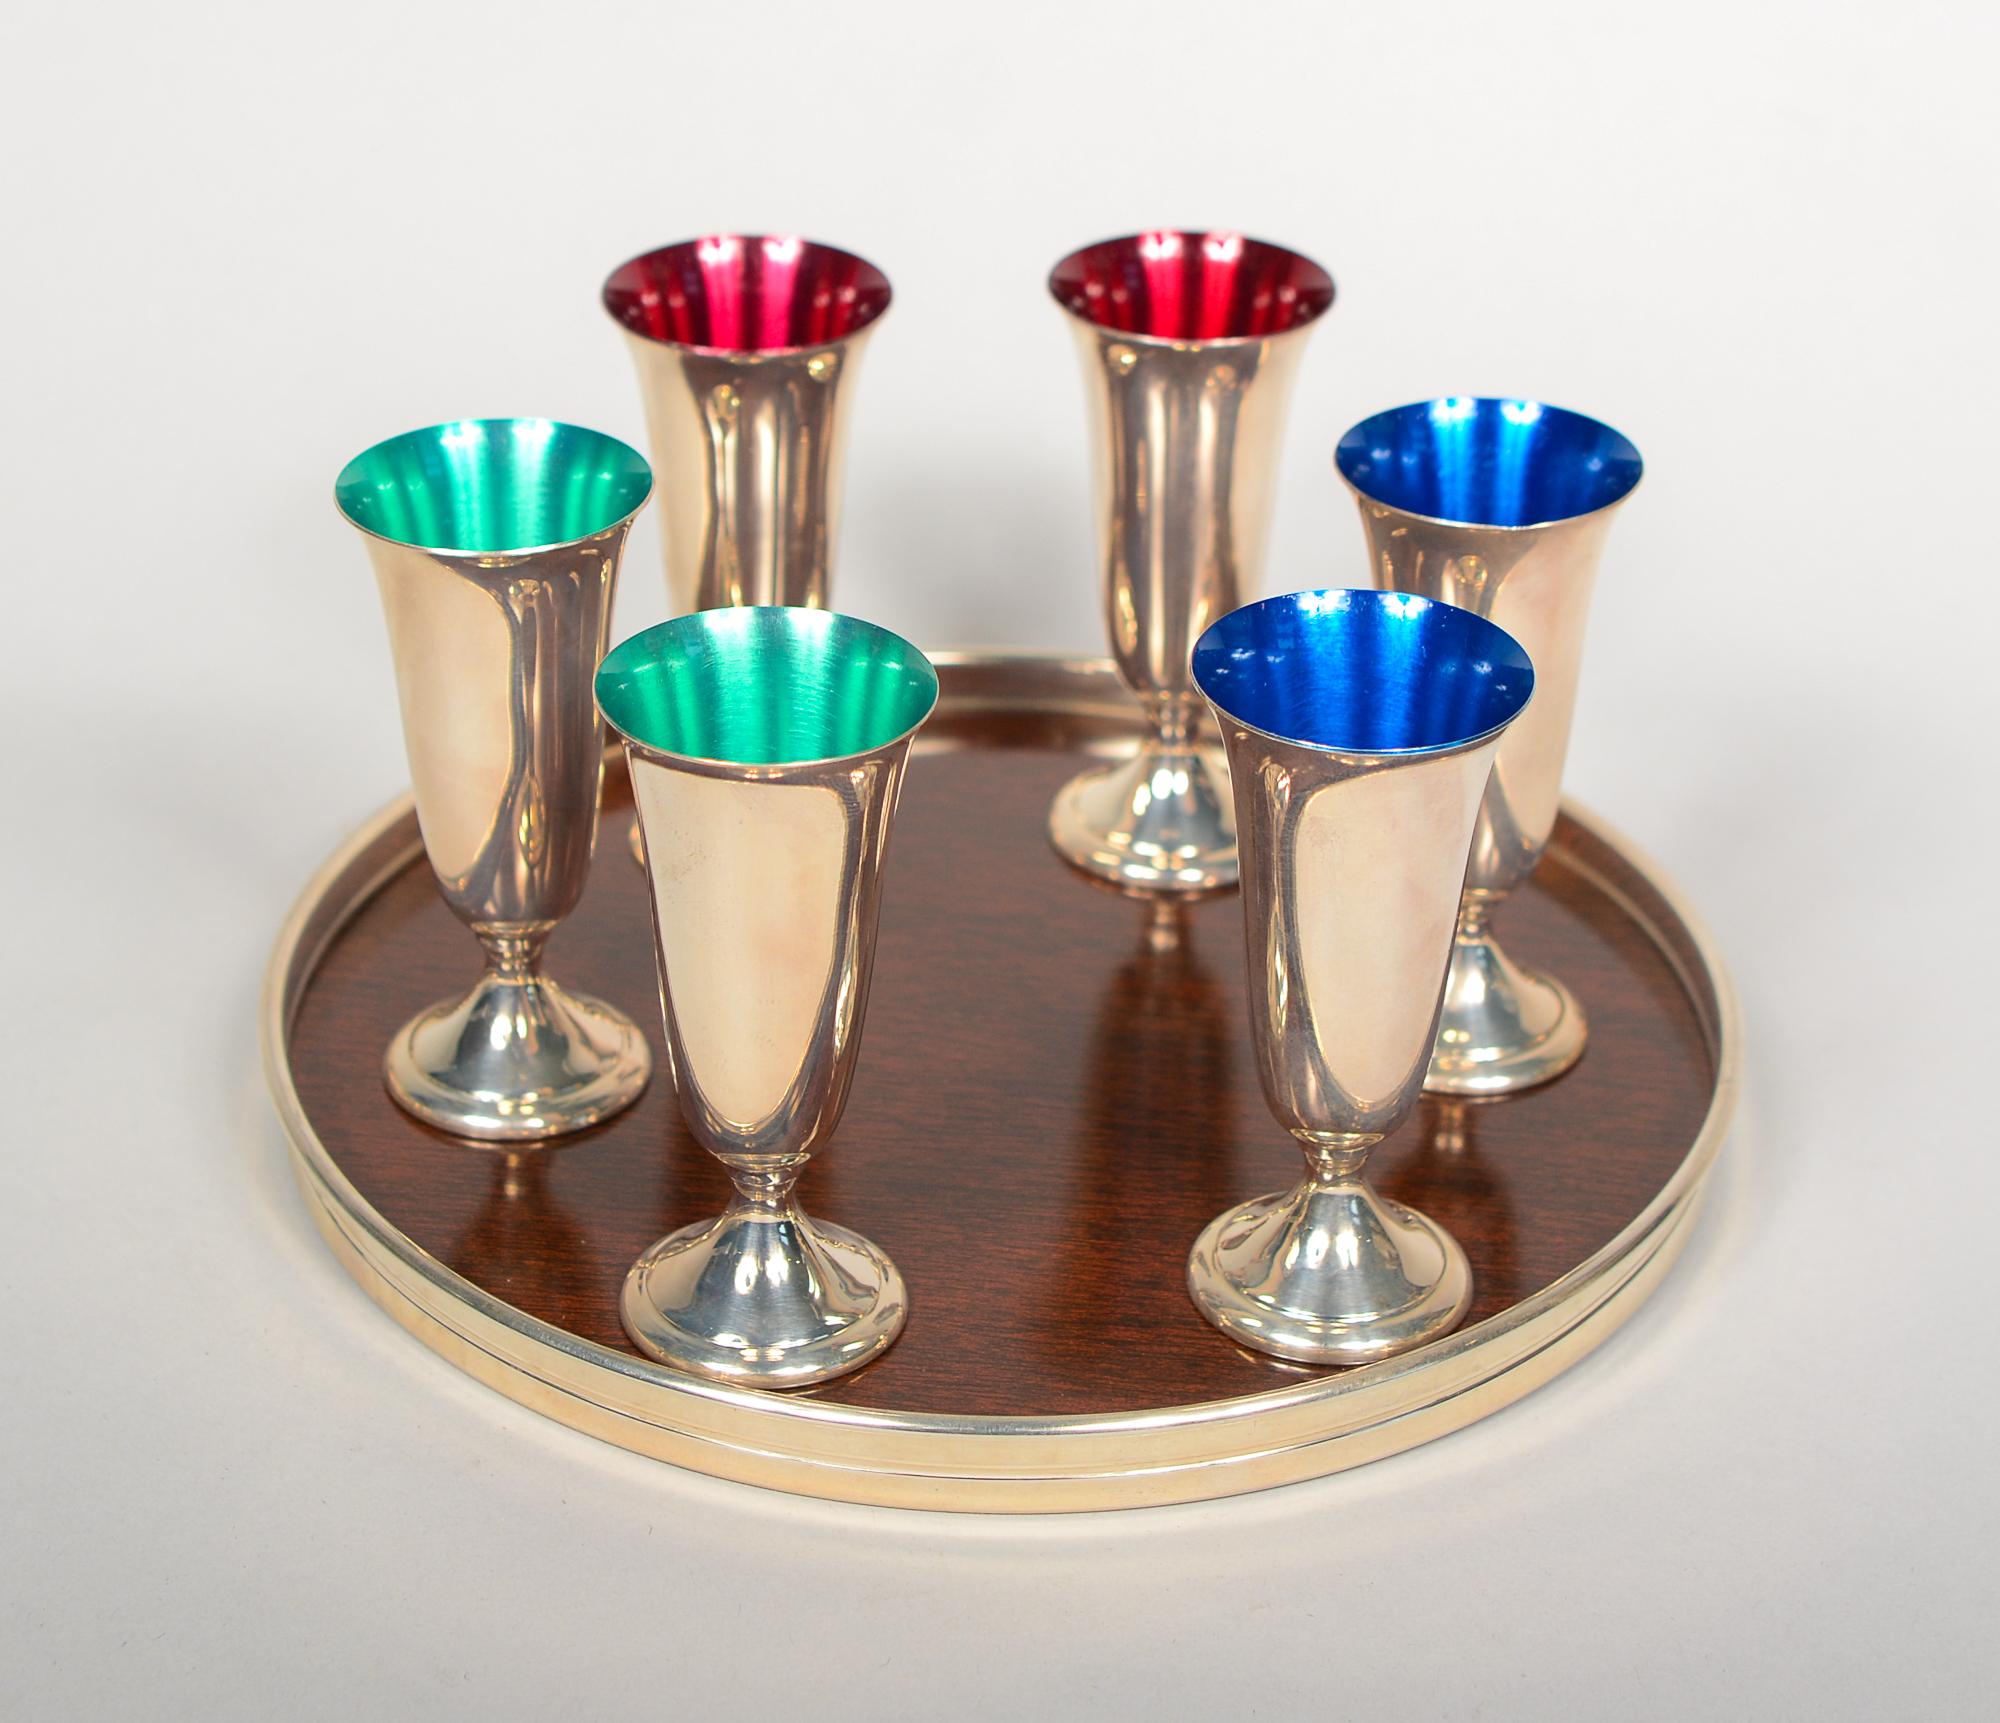 Set of six sterling silver cordials with a serving tray by Alvin Silver Co. The interior of the cordials are enameled red, green or blue. The tray has a sterling rim. The center of the tray is plastic with a faux wood grain. The cordials are 2 7/8